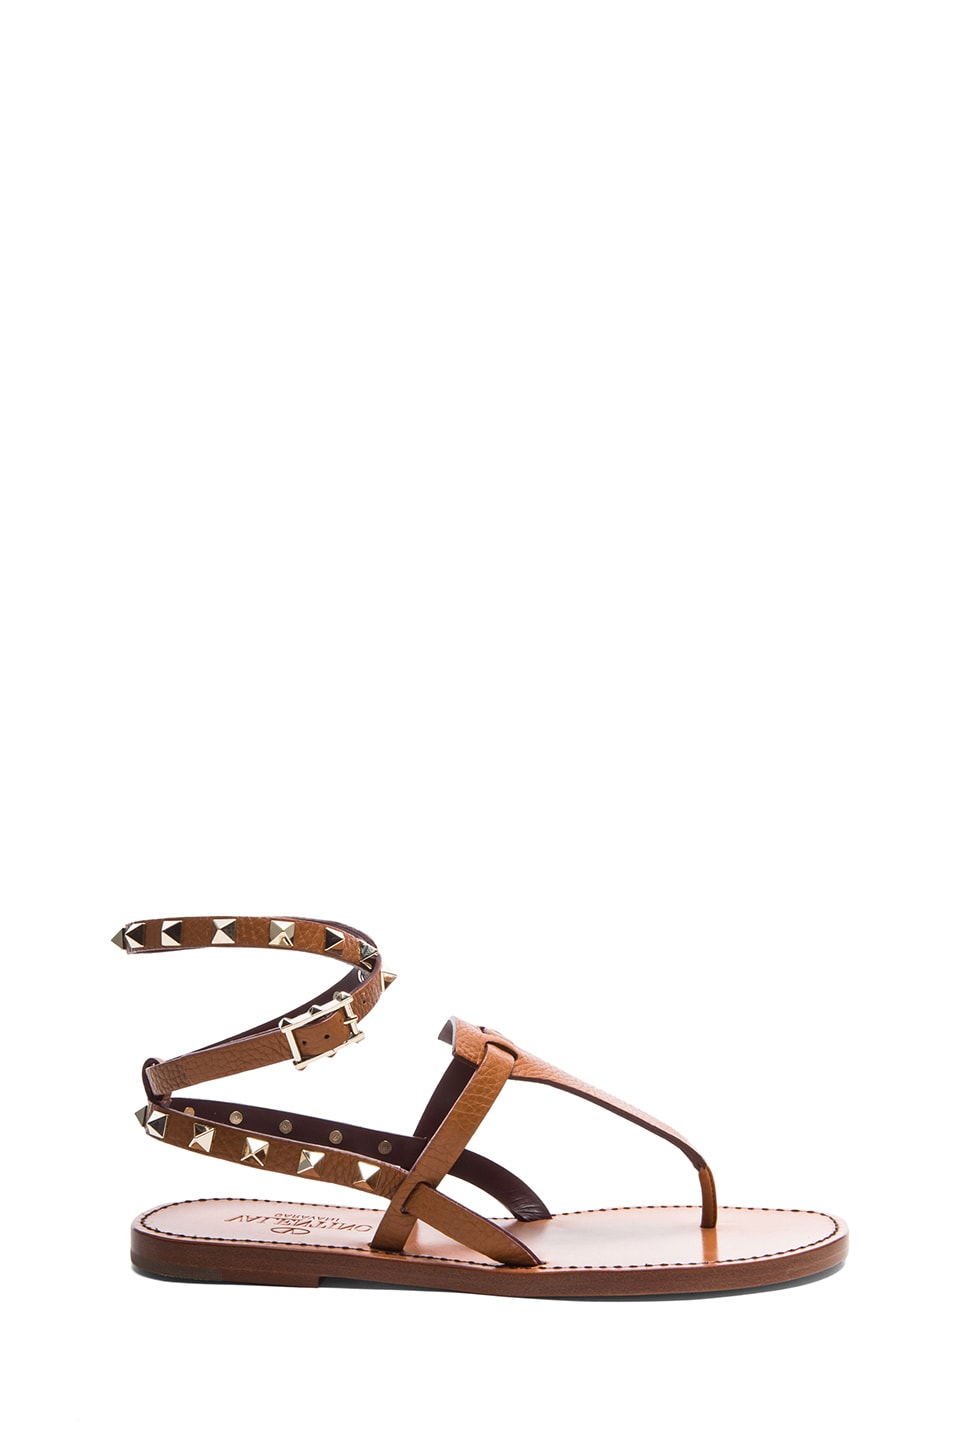 Valentino Rockstud Thong Grained Leather Sandals in Light Cuir | FWRD